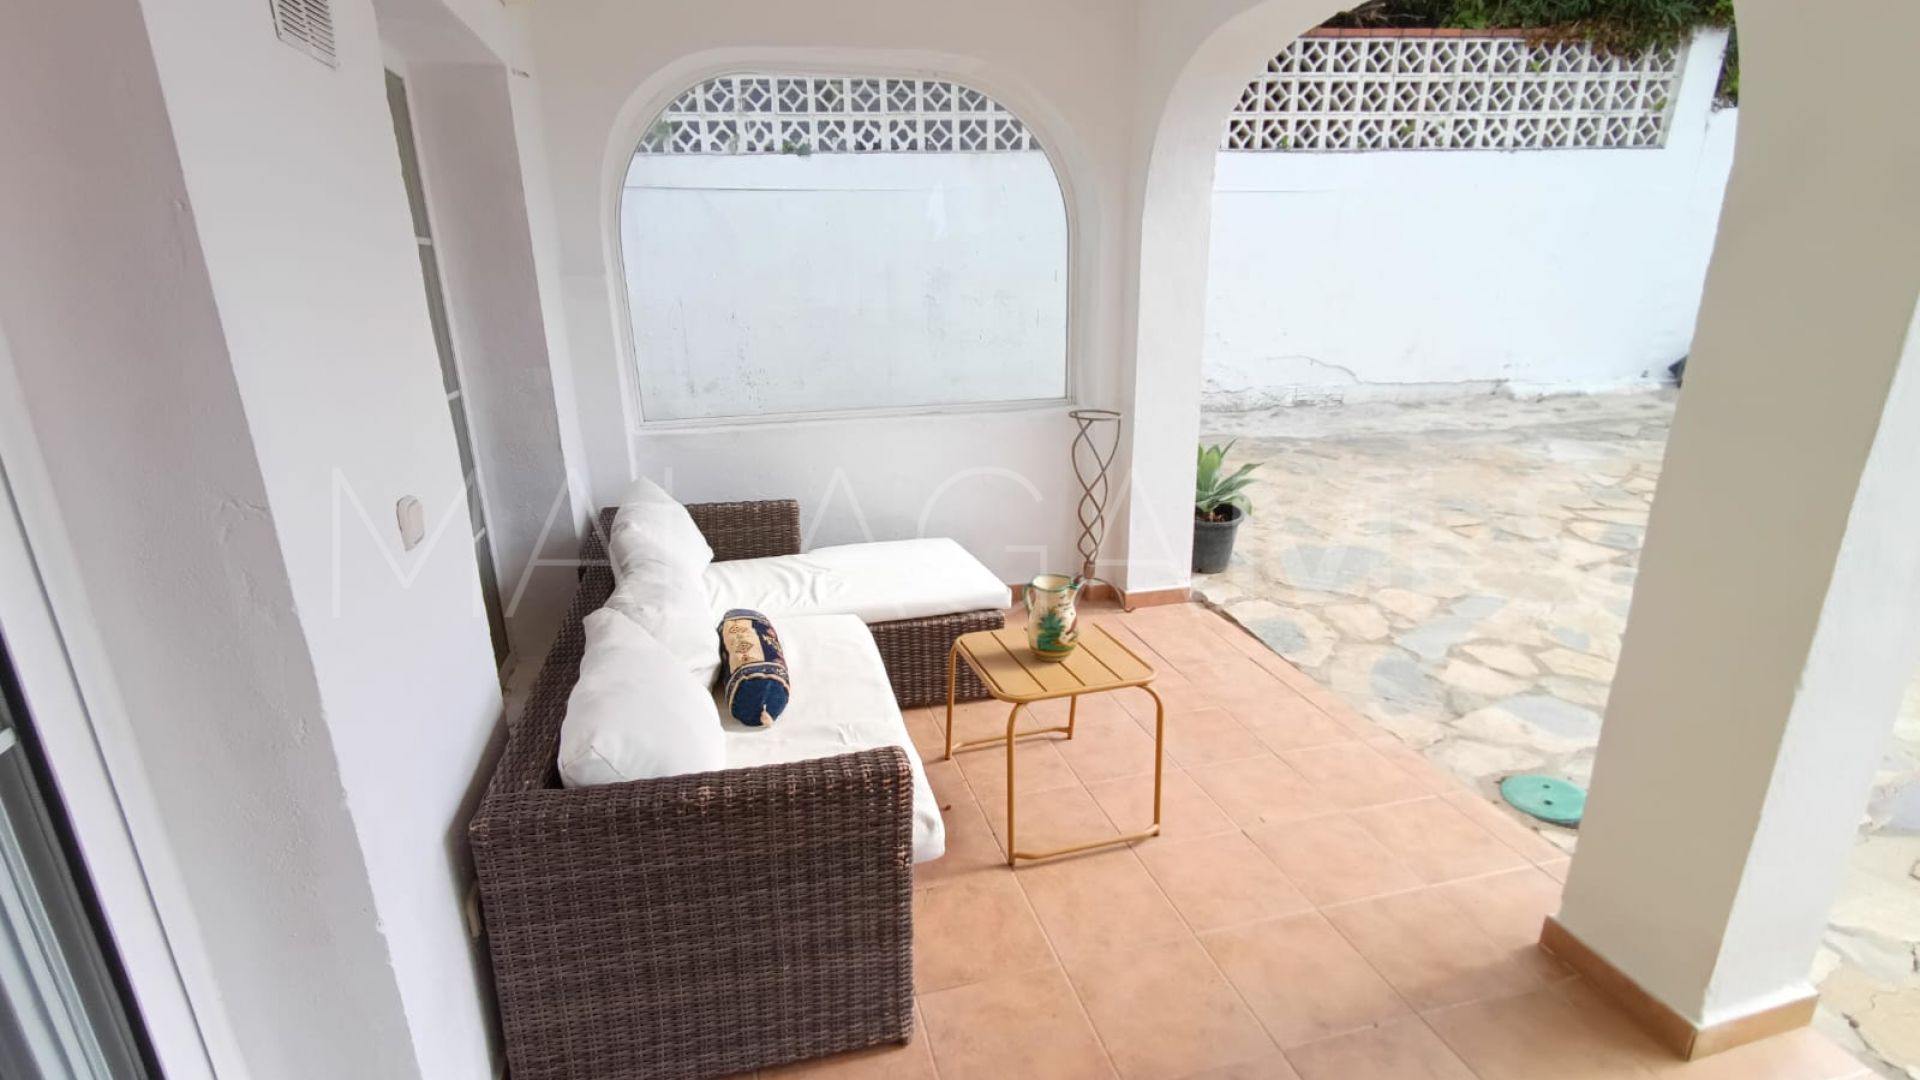 For sale El Real Panorama villa with 3 bedrooms